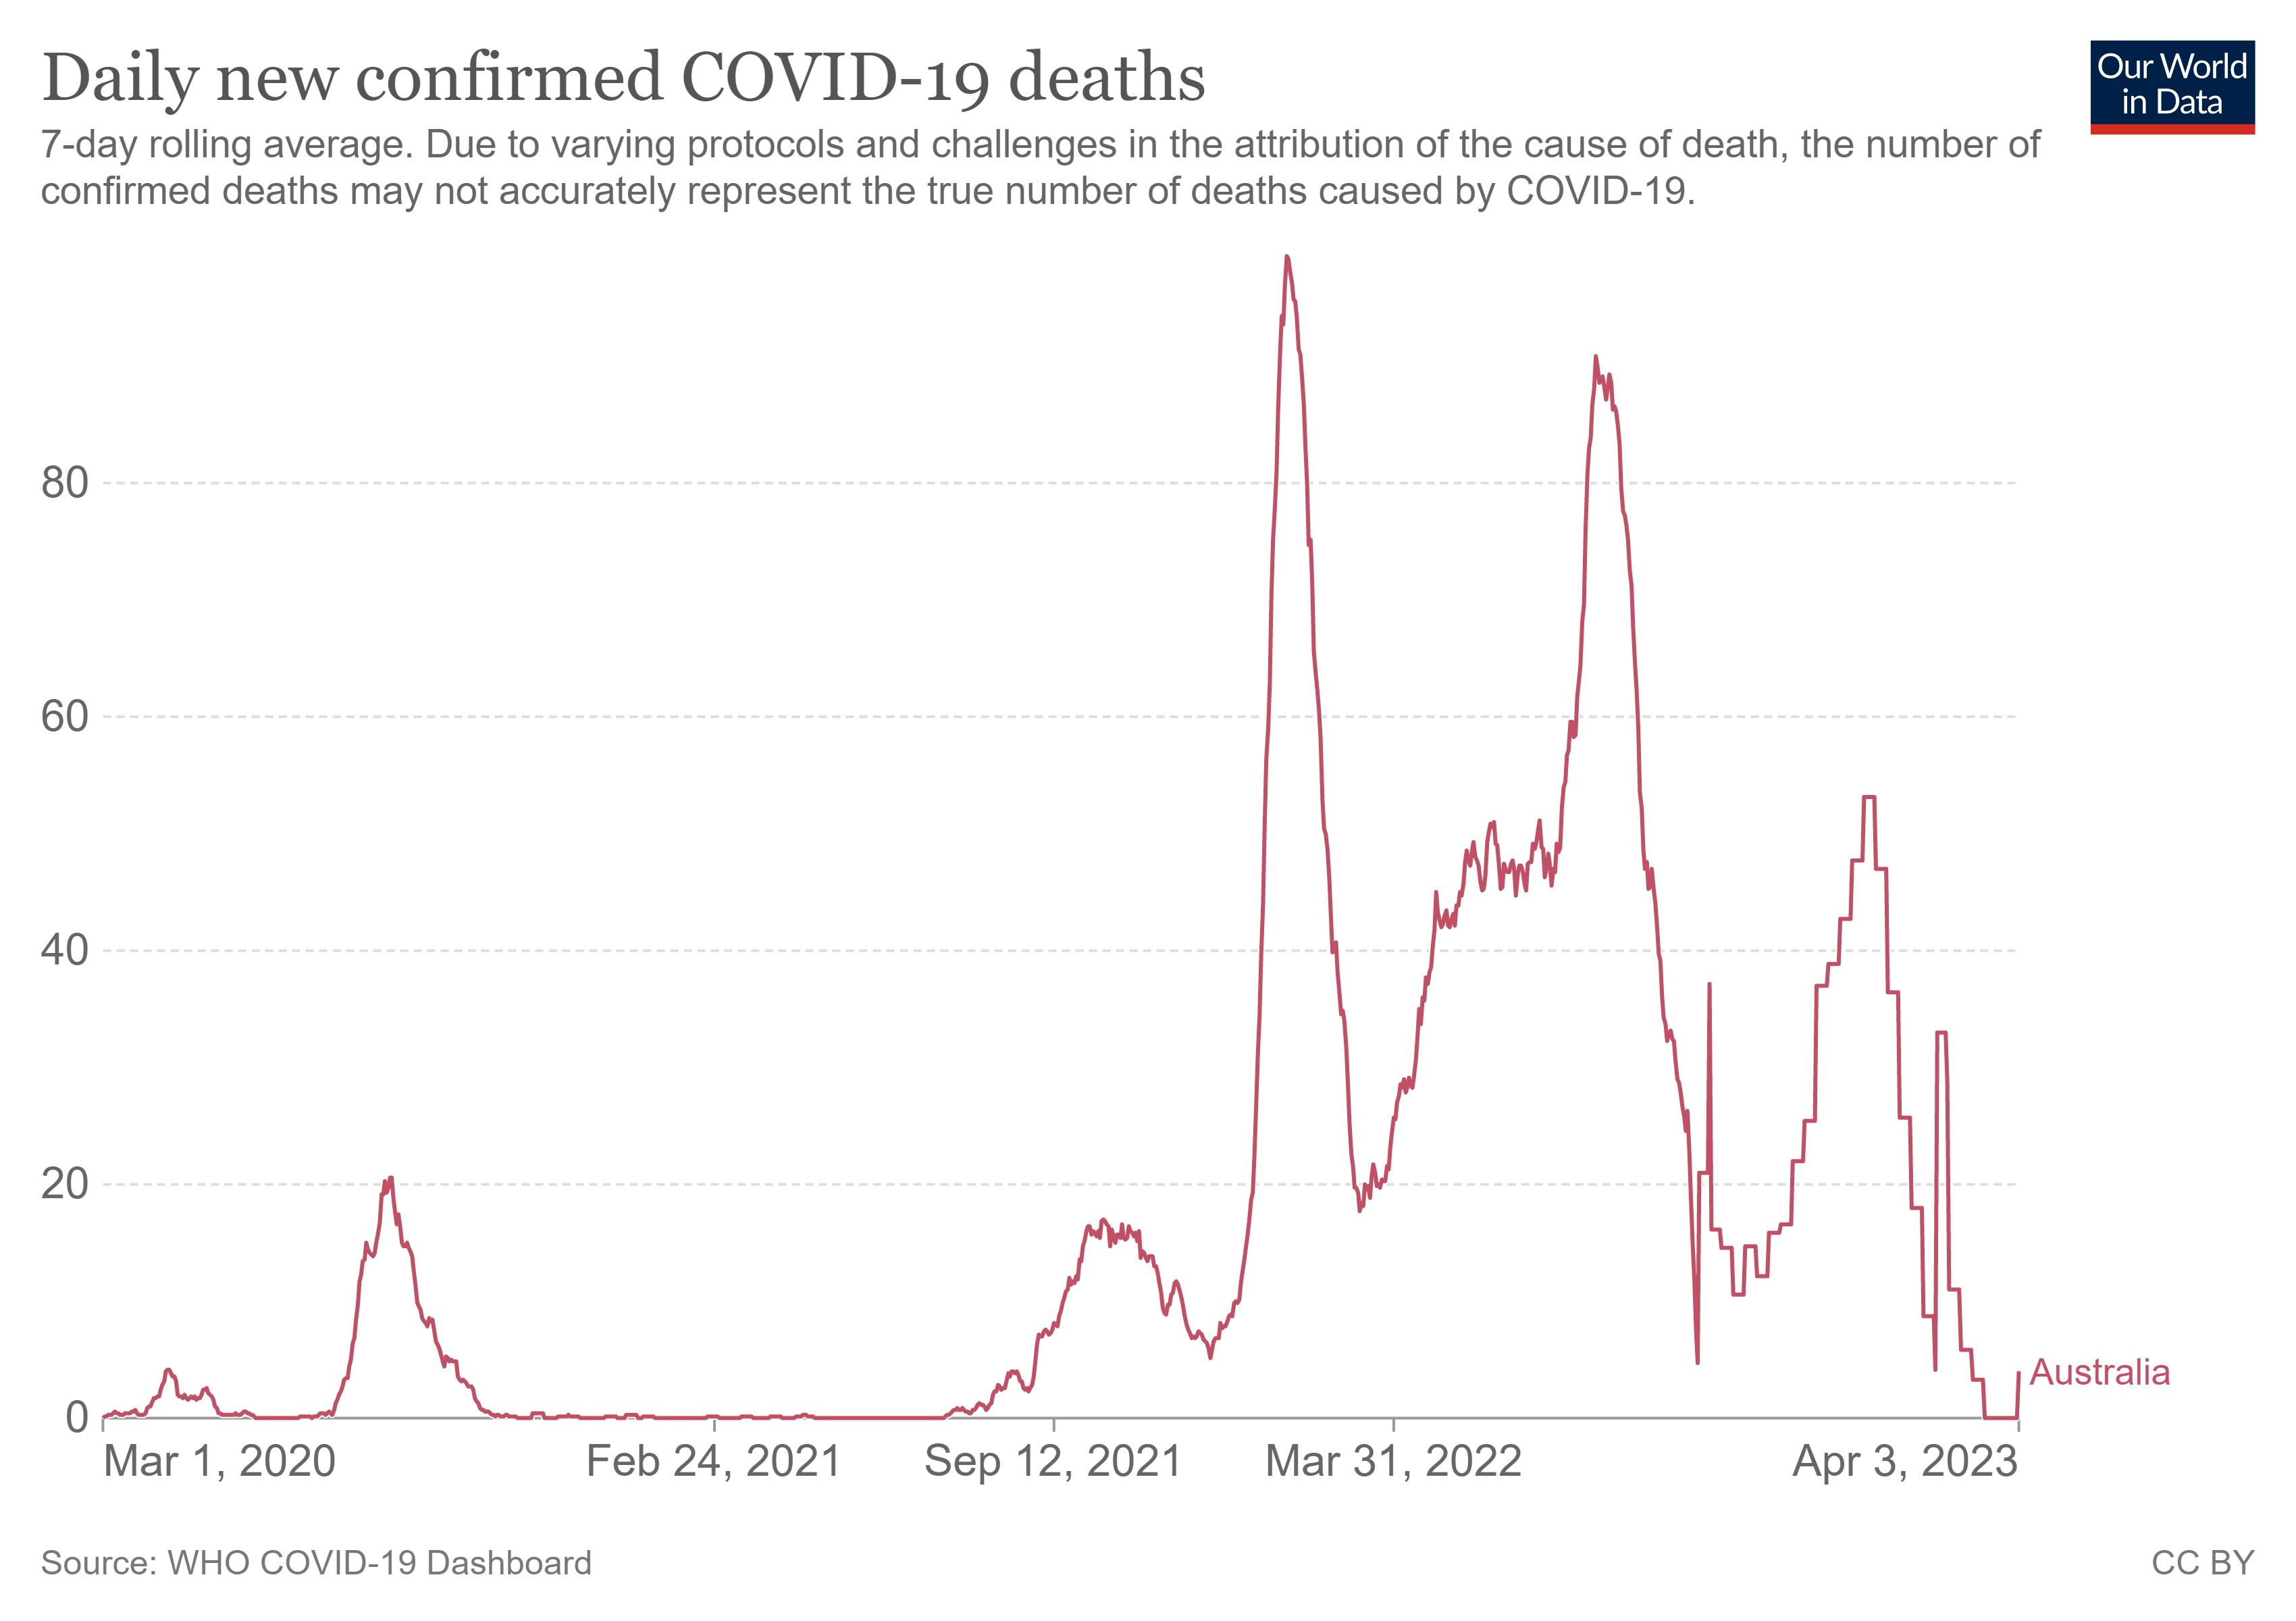 Chart showing a red line rising and falling to represent COVID deaths over time peaking in March 2022.